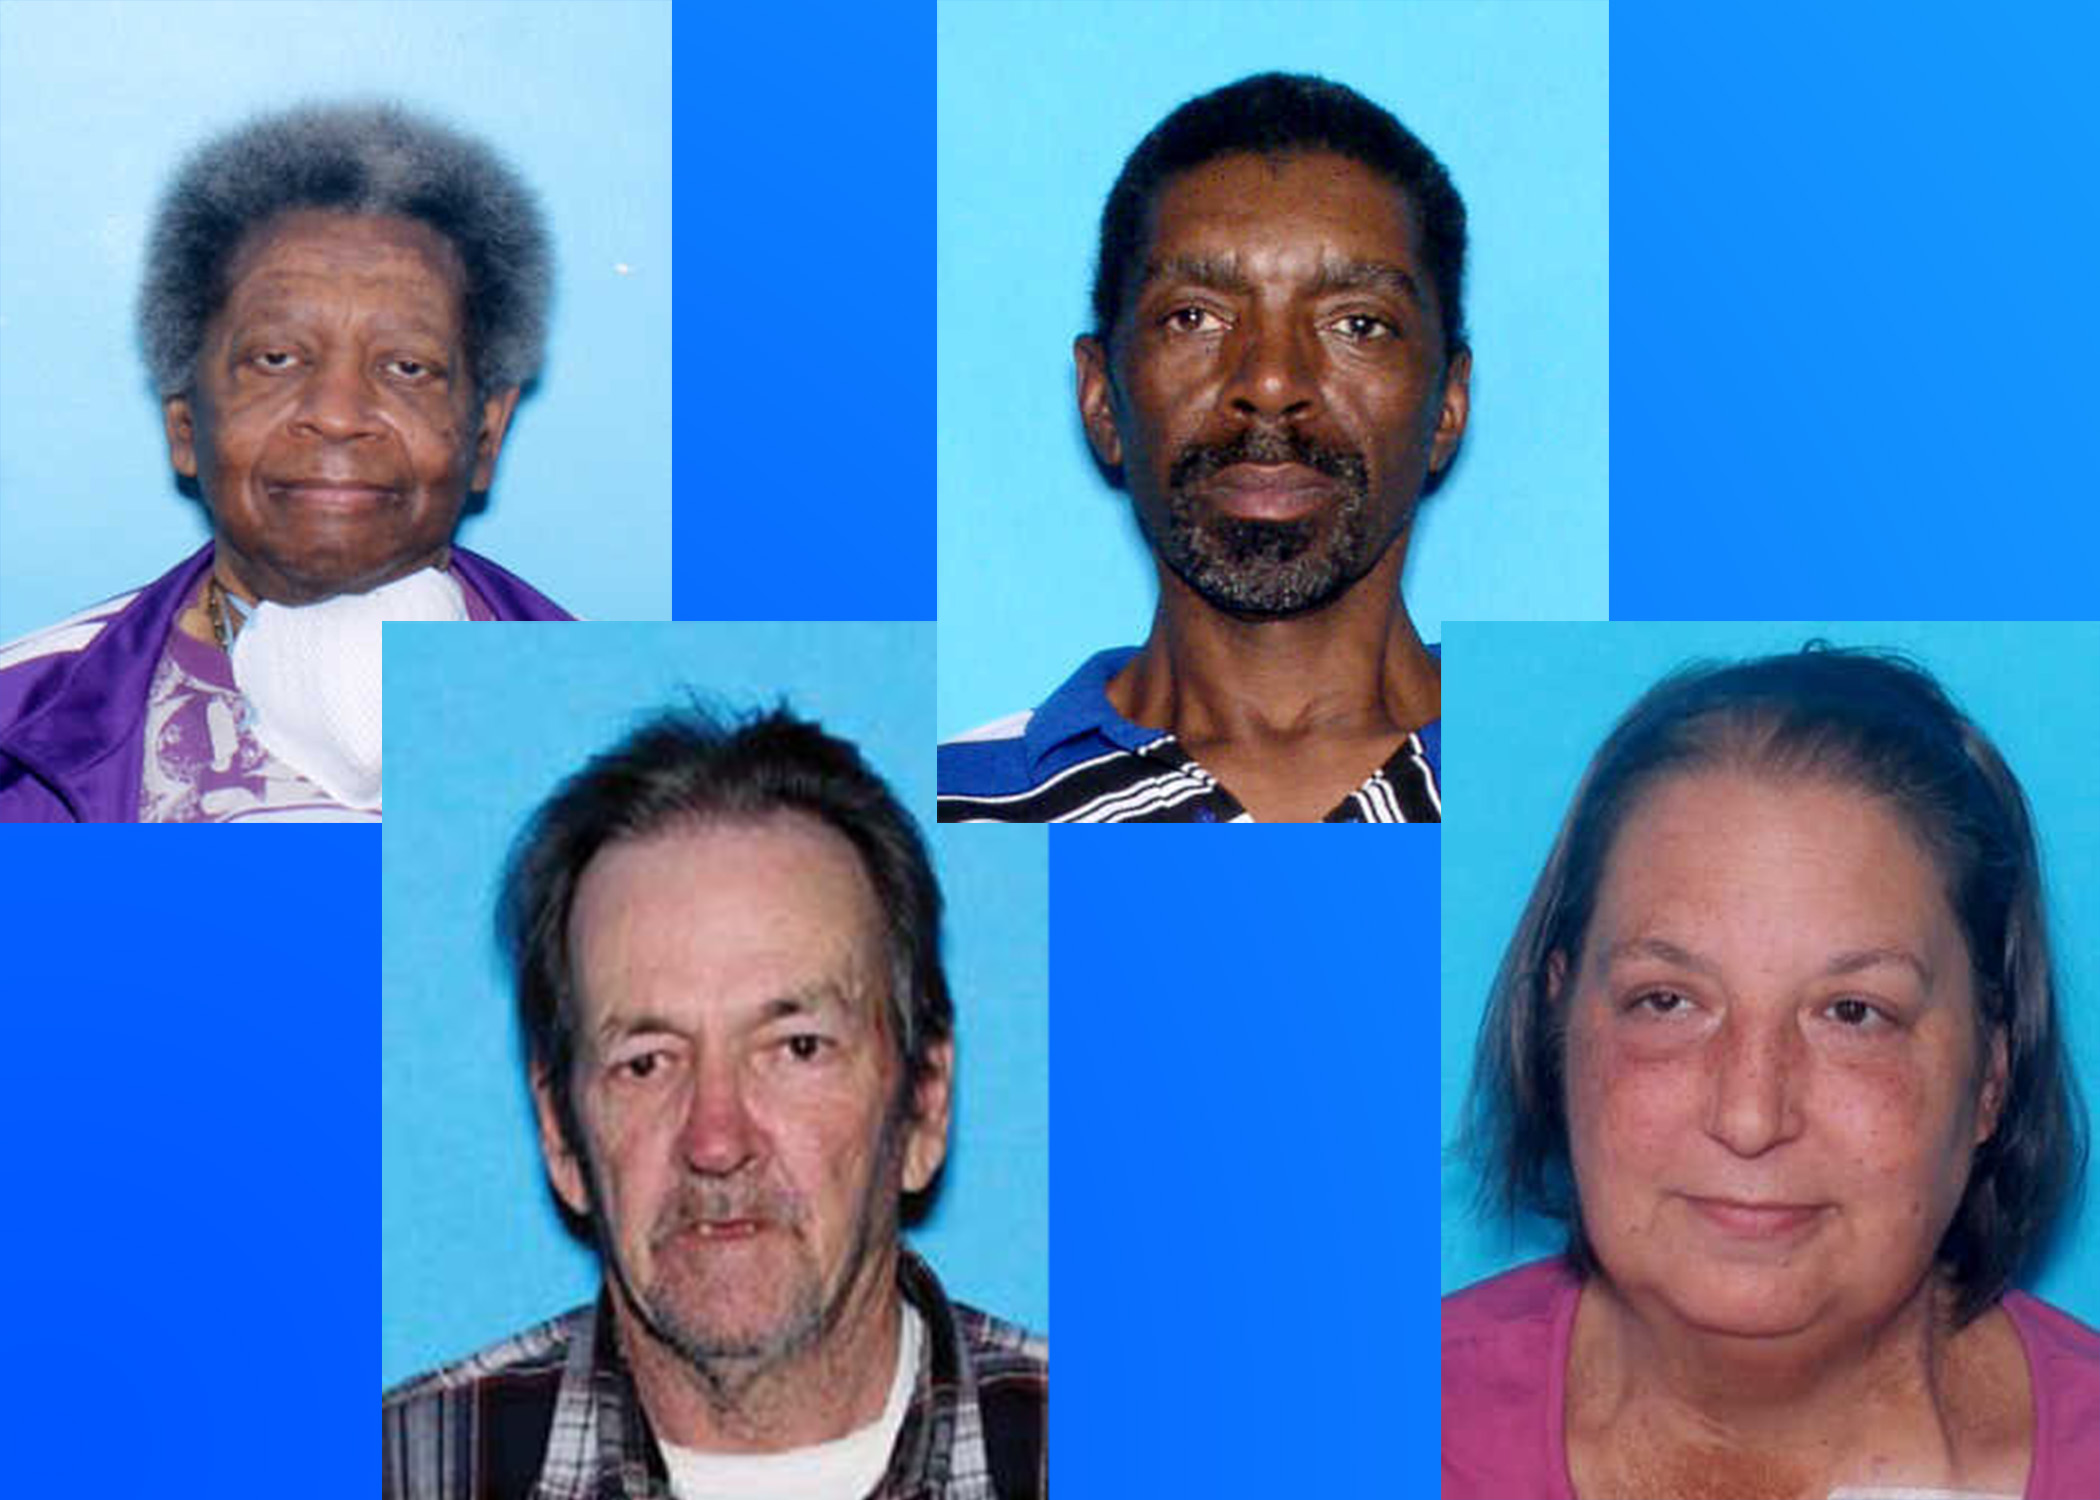 Jefferson County Coroner seeks help in locating the families of deceased individuals